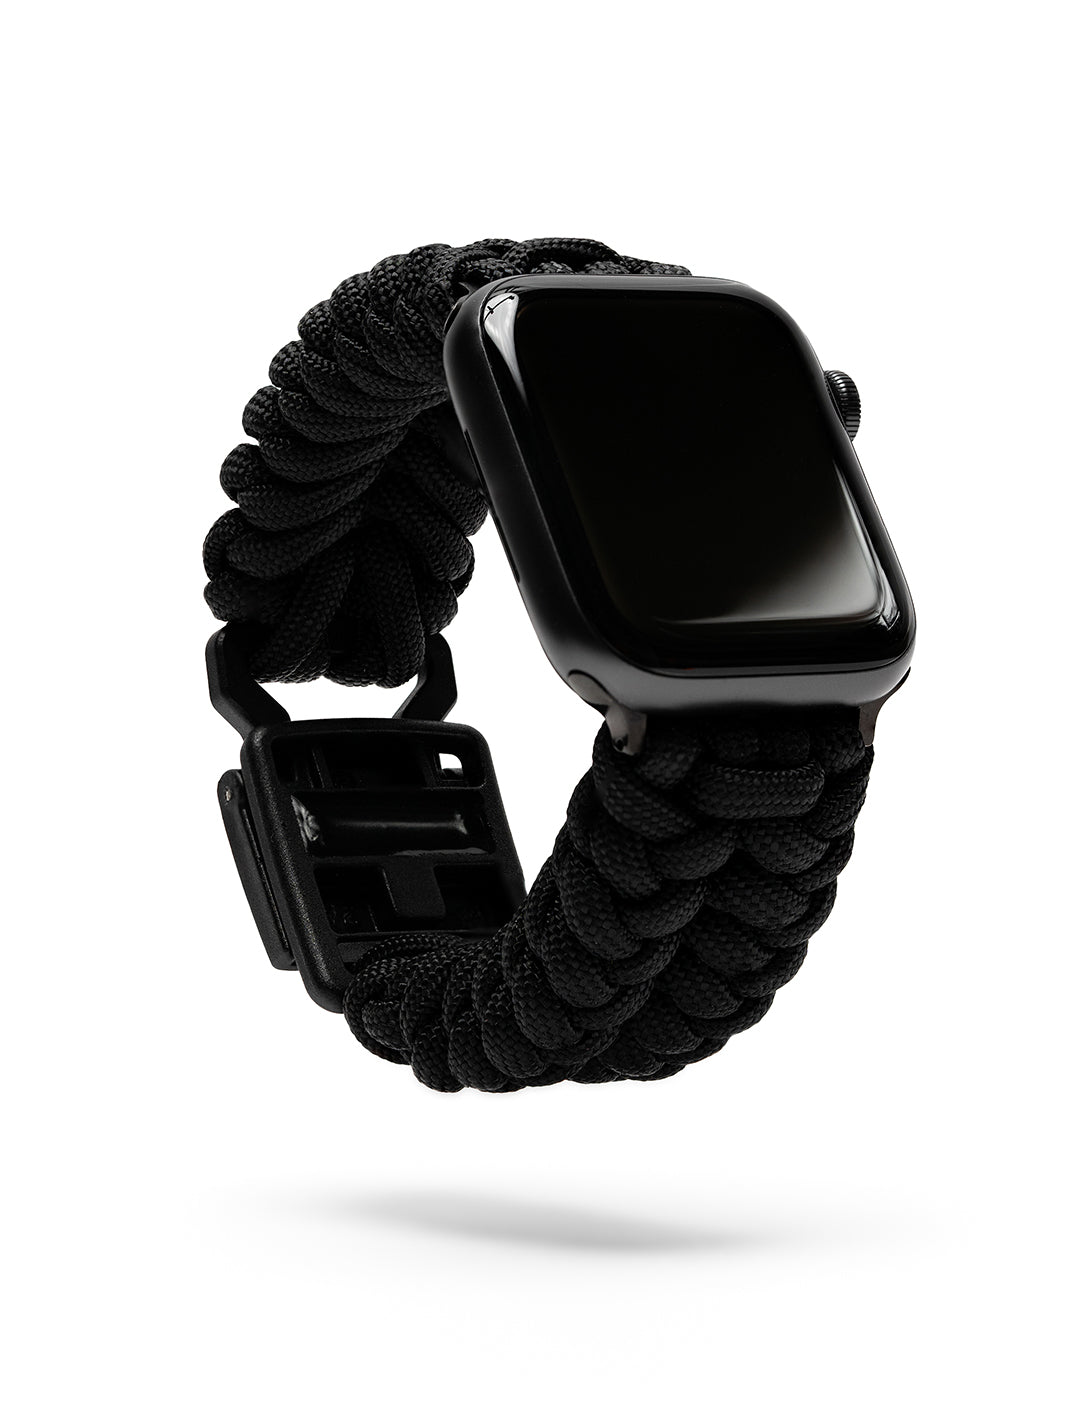 Strapcord Ribs Apple Watch Band Strap Article 001 Milspec Black 1065x1420